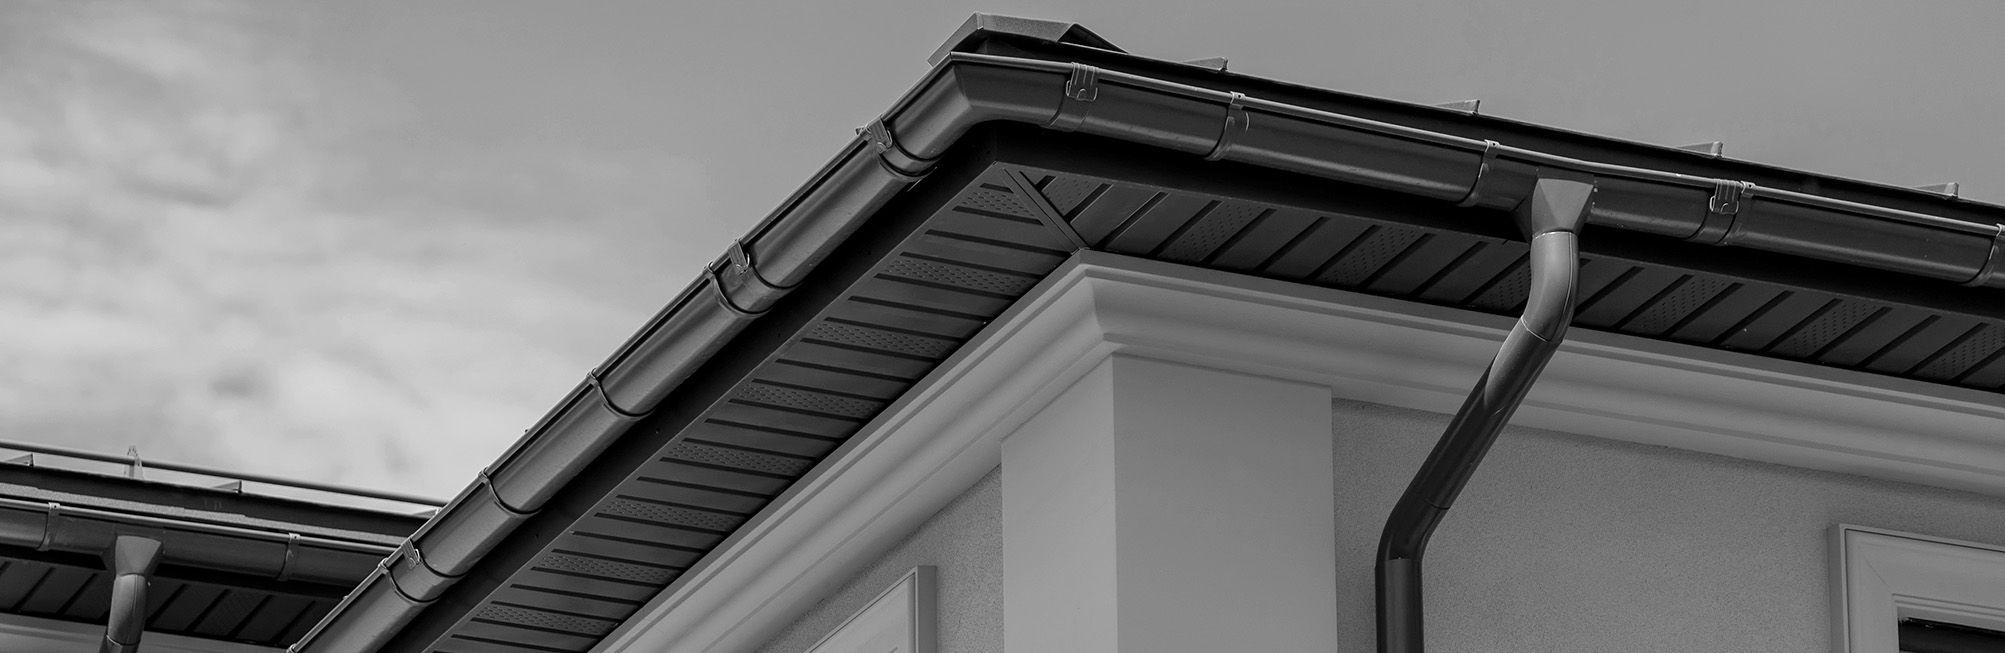 Replacement vinyl gutters installed by professional gutter contractors